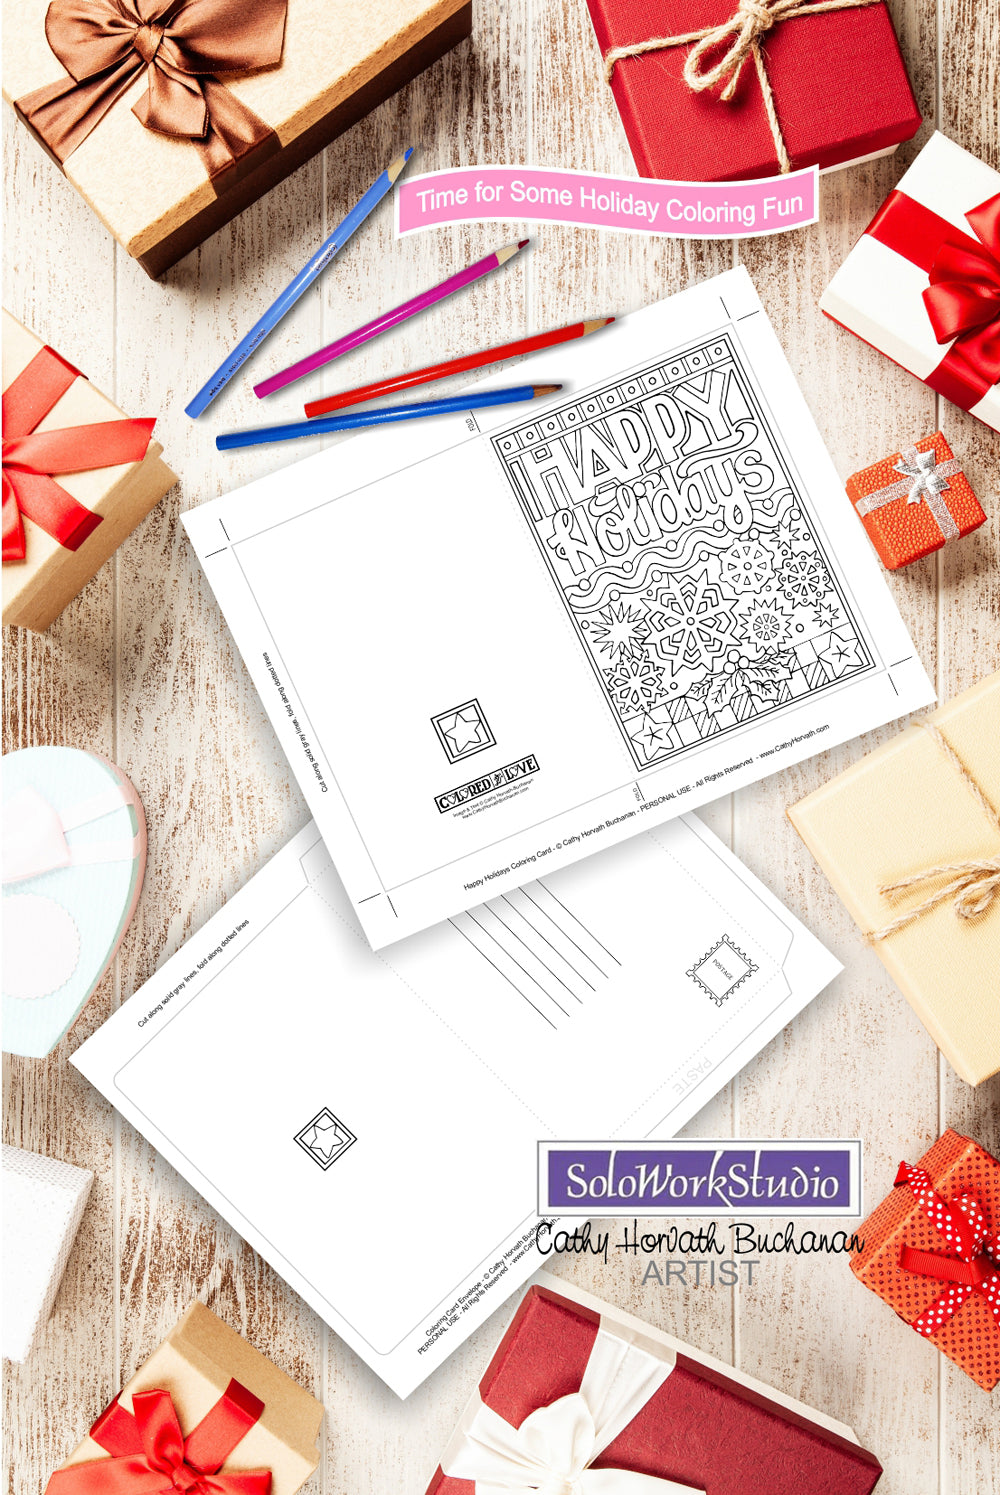 Happy Holidays Coloring Card Kit, Card + Envelope PDF Download Printable by Cathy Horvath Buchanan